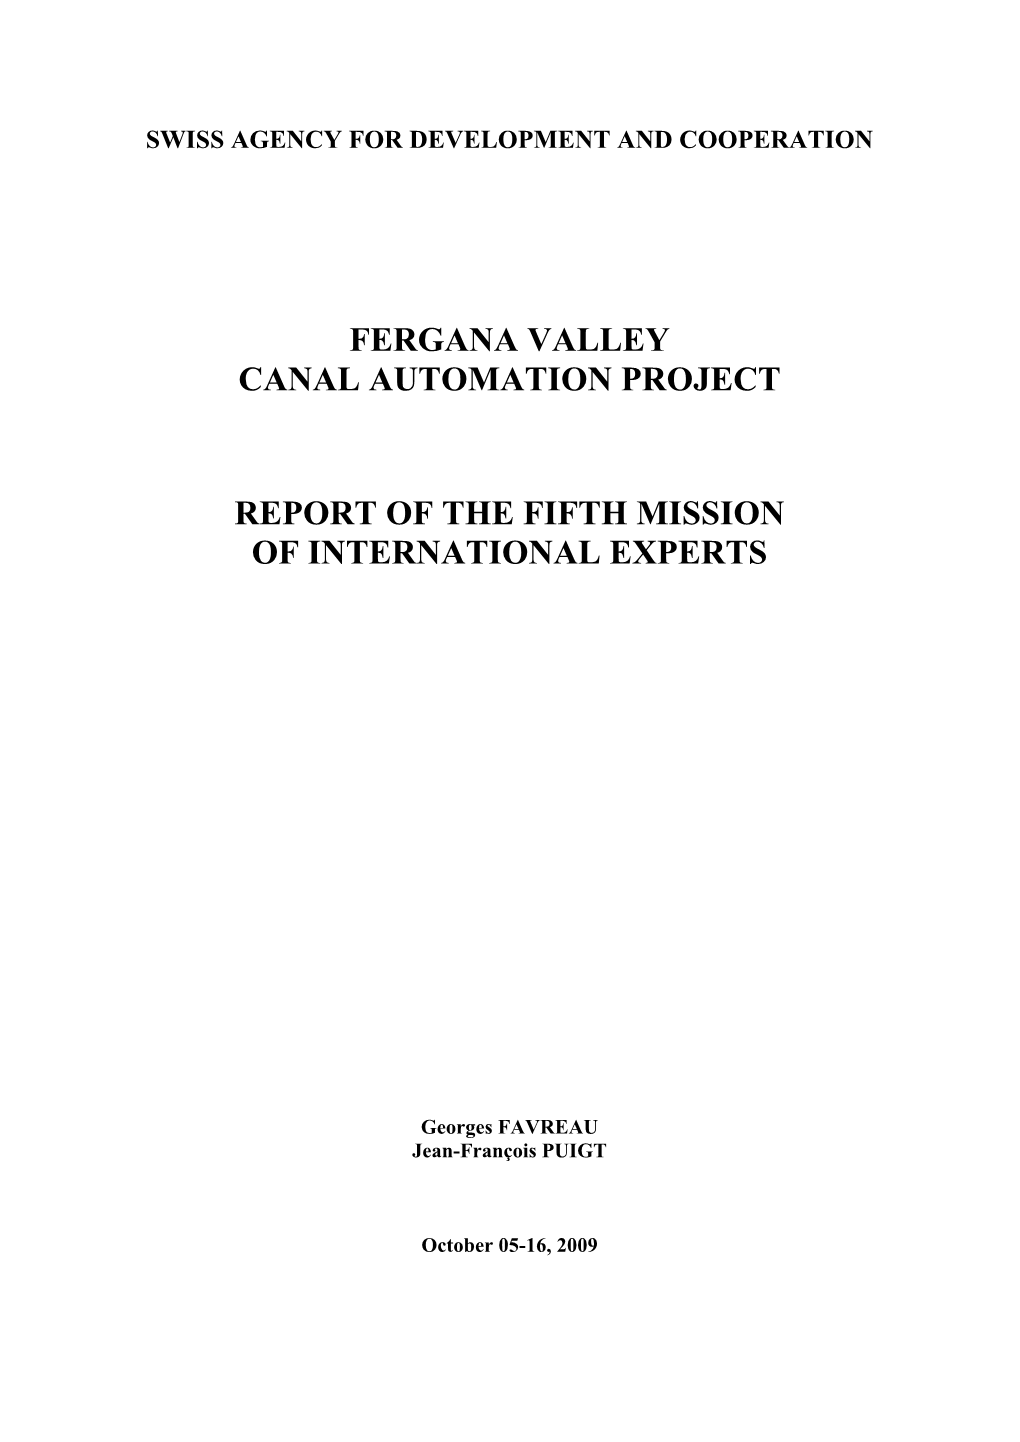 Fergana Valley Canal Automation Project Report of the Fifth Mission of International Experts